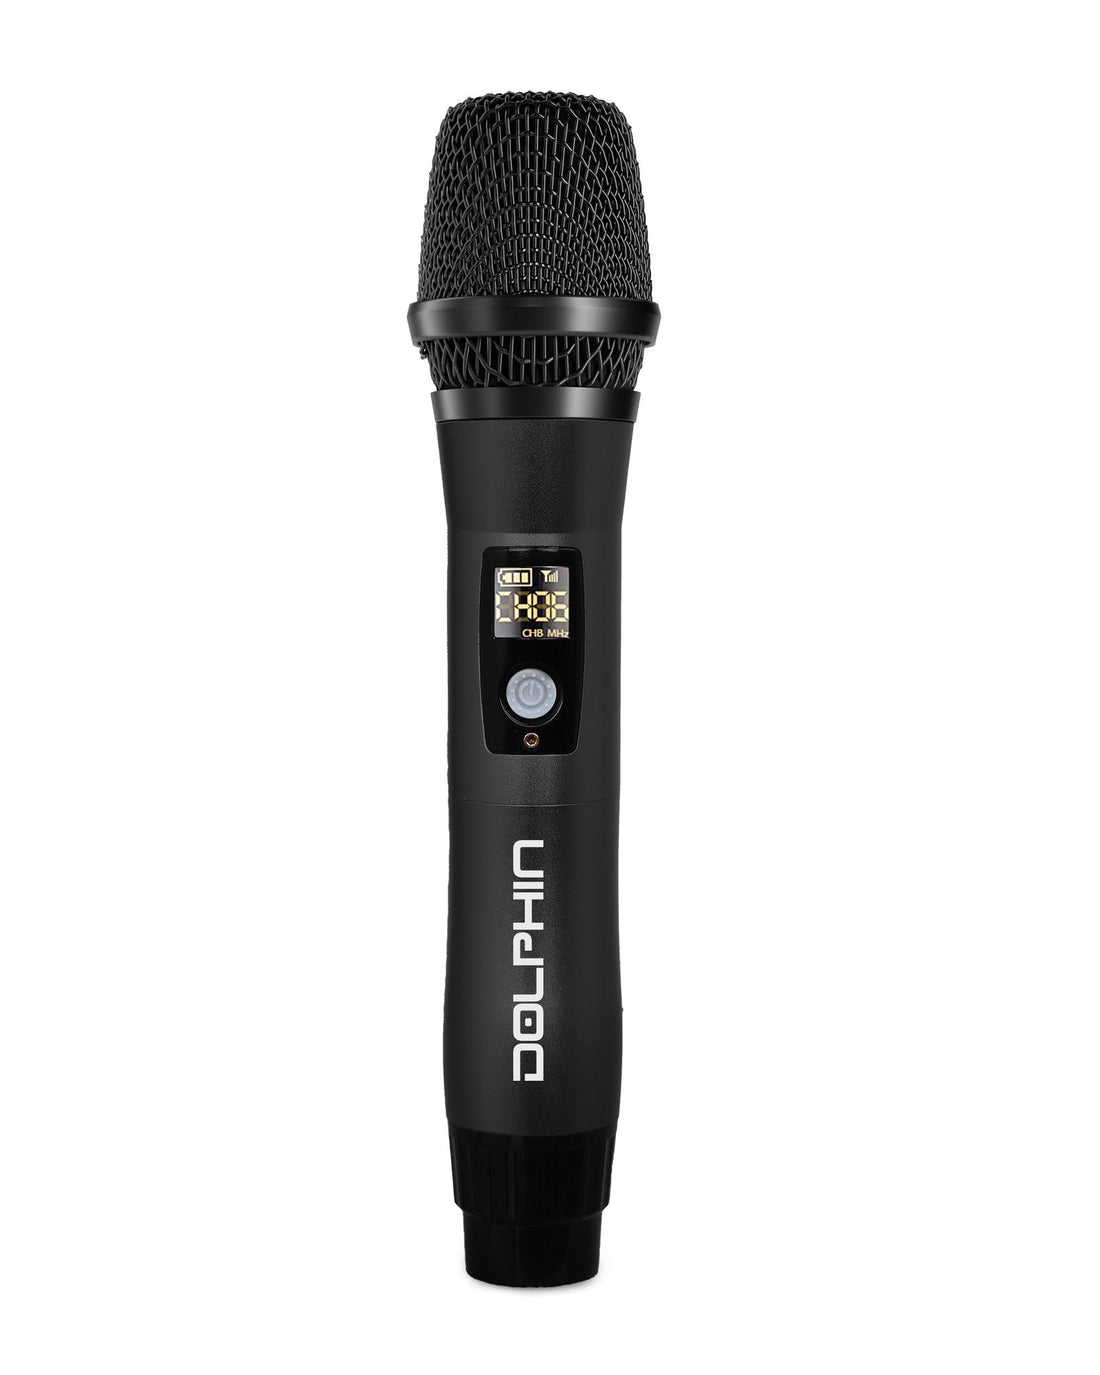 Dolphin MCX11 UHF Wireless Microphone - USB-C Rechargeable, 50 Channels, Anti-Interference Technology - Top ElectrosMicrophonesMCX11-BLACK810059431577